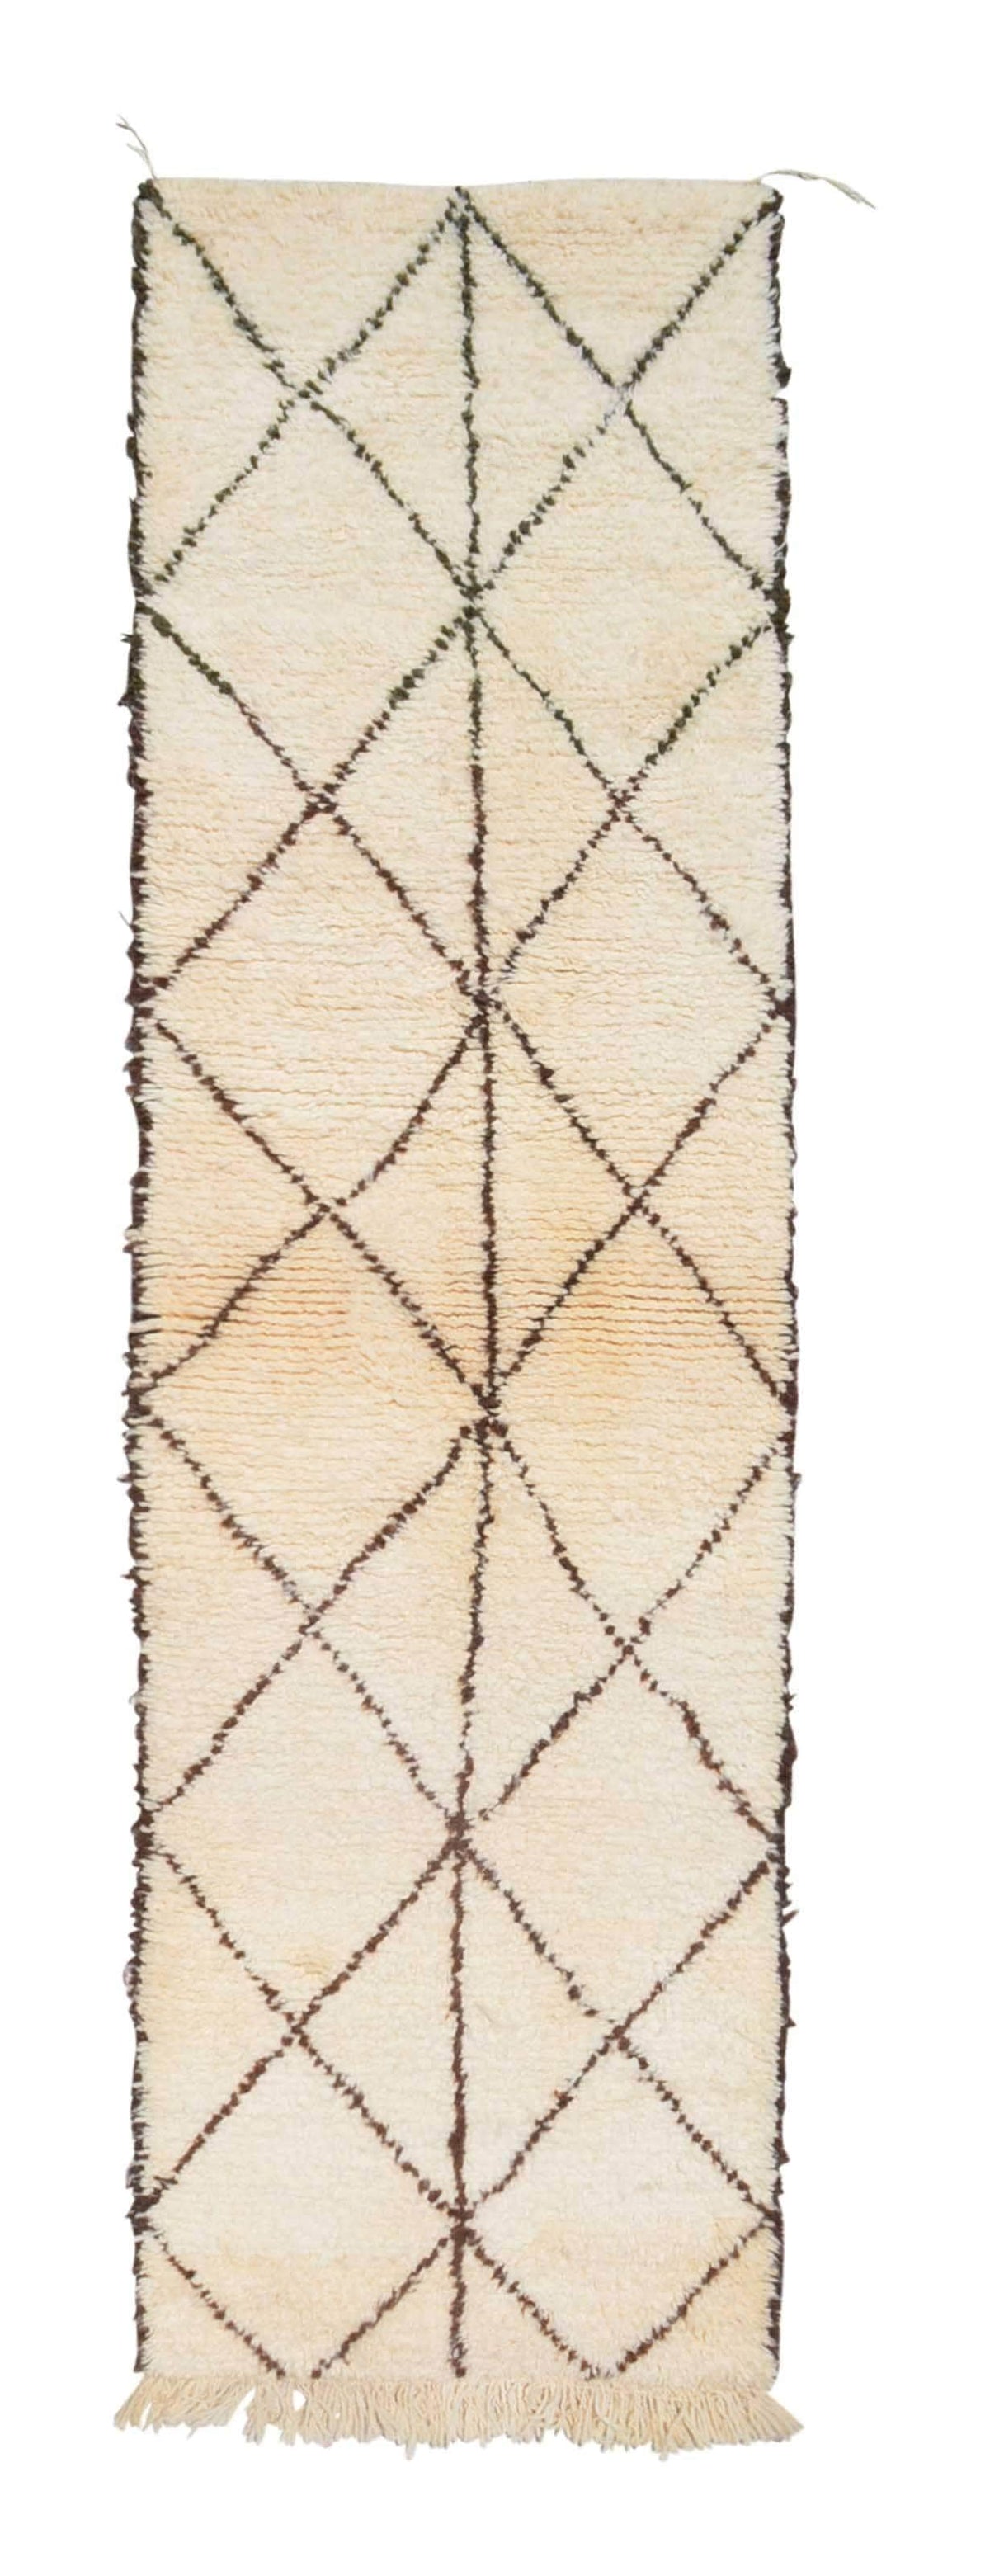 Moroccan Rug Inexpensive Moroccan Rugs -Illuminate Collective illuminate collective